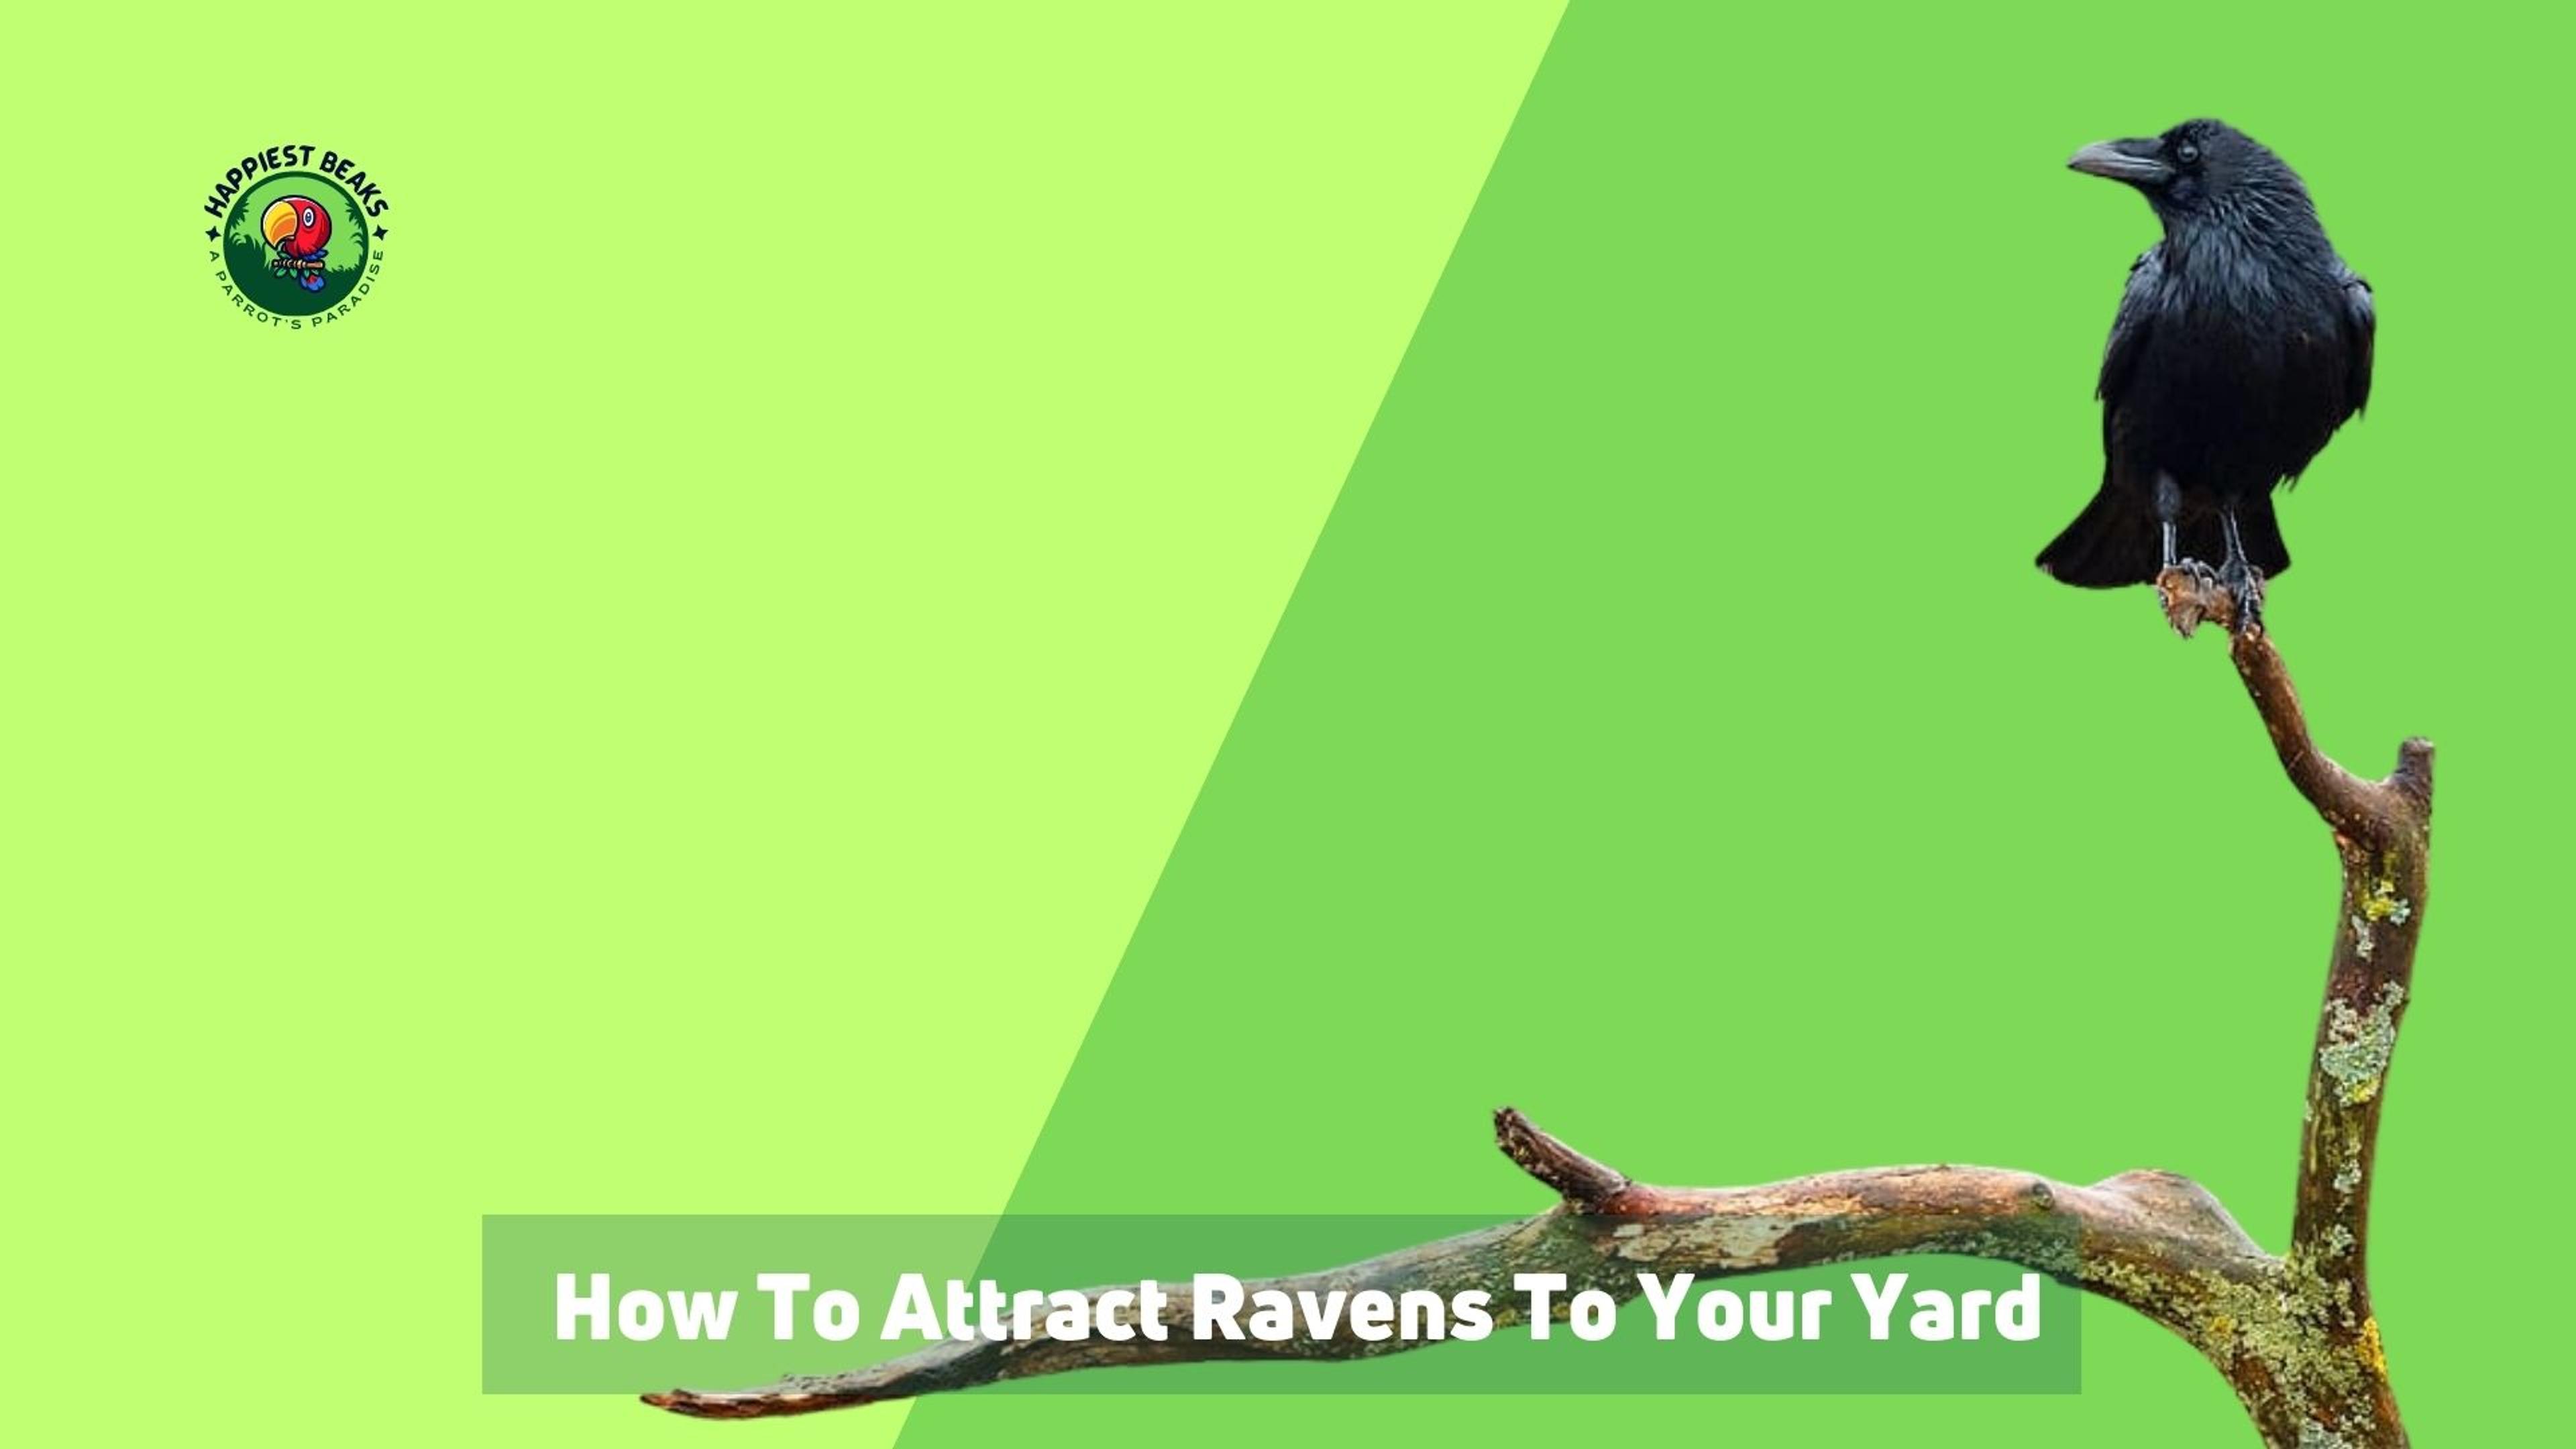 How To Attract Ravens To Your Yard